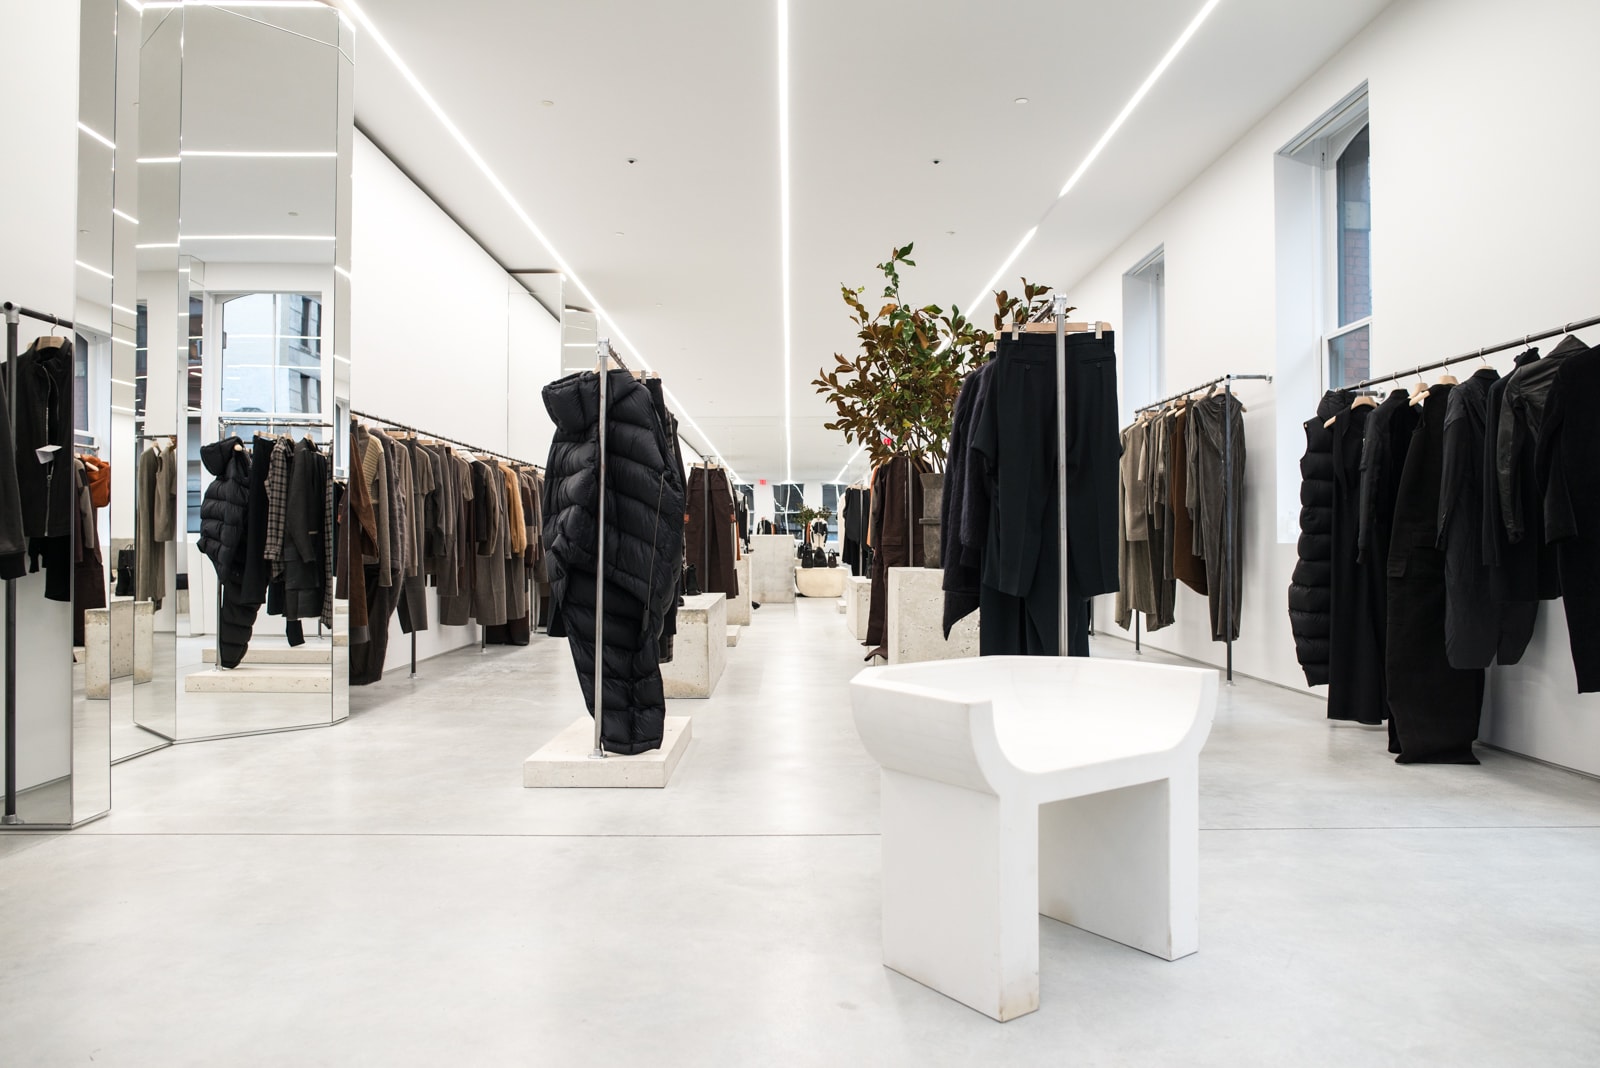 Inside Designer Rick Owens's Minimalist Home Filled With Wonderful Objects